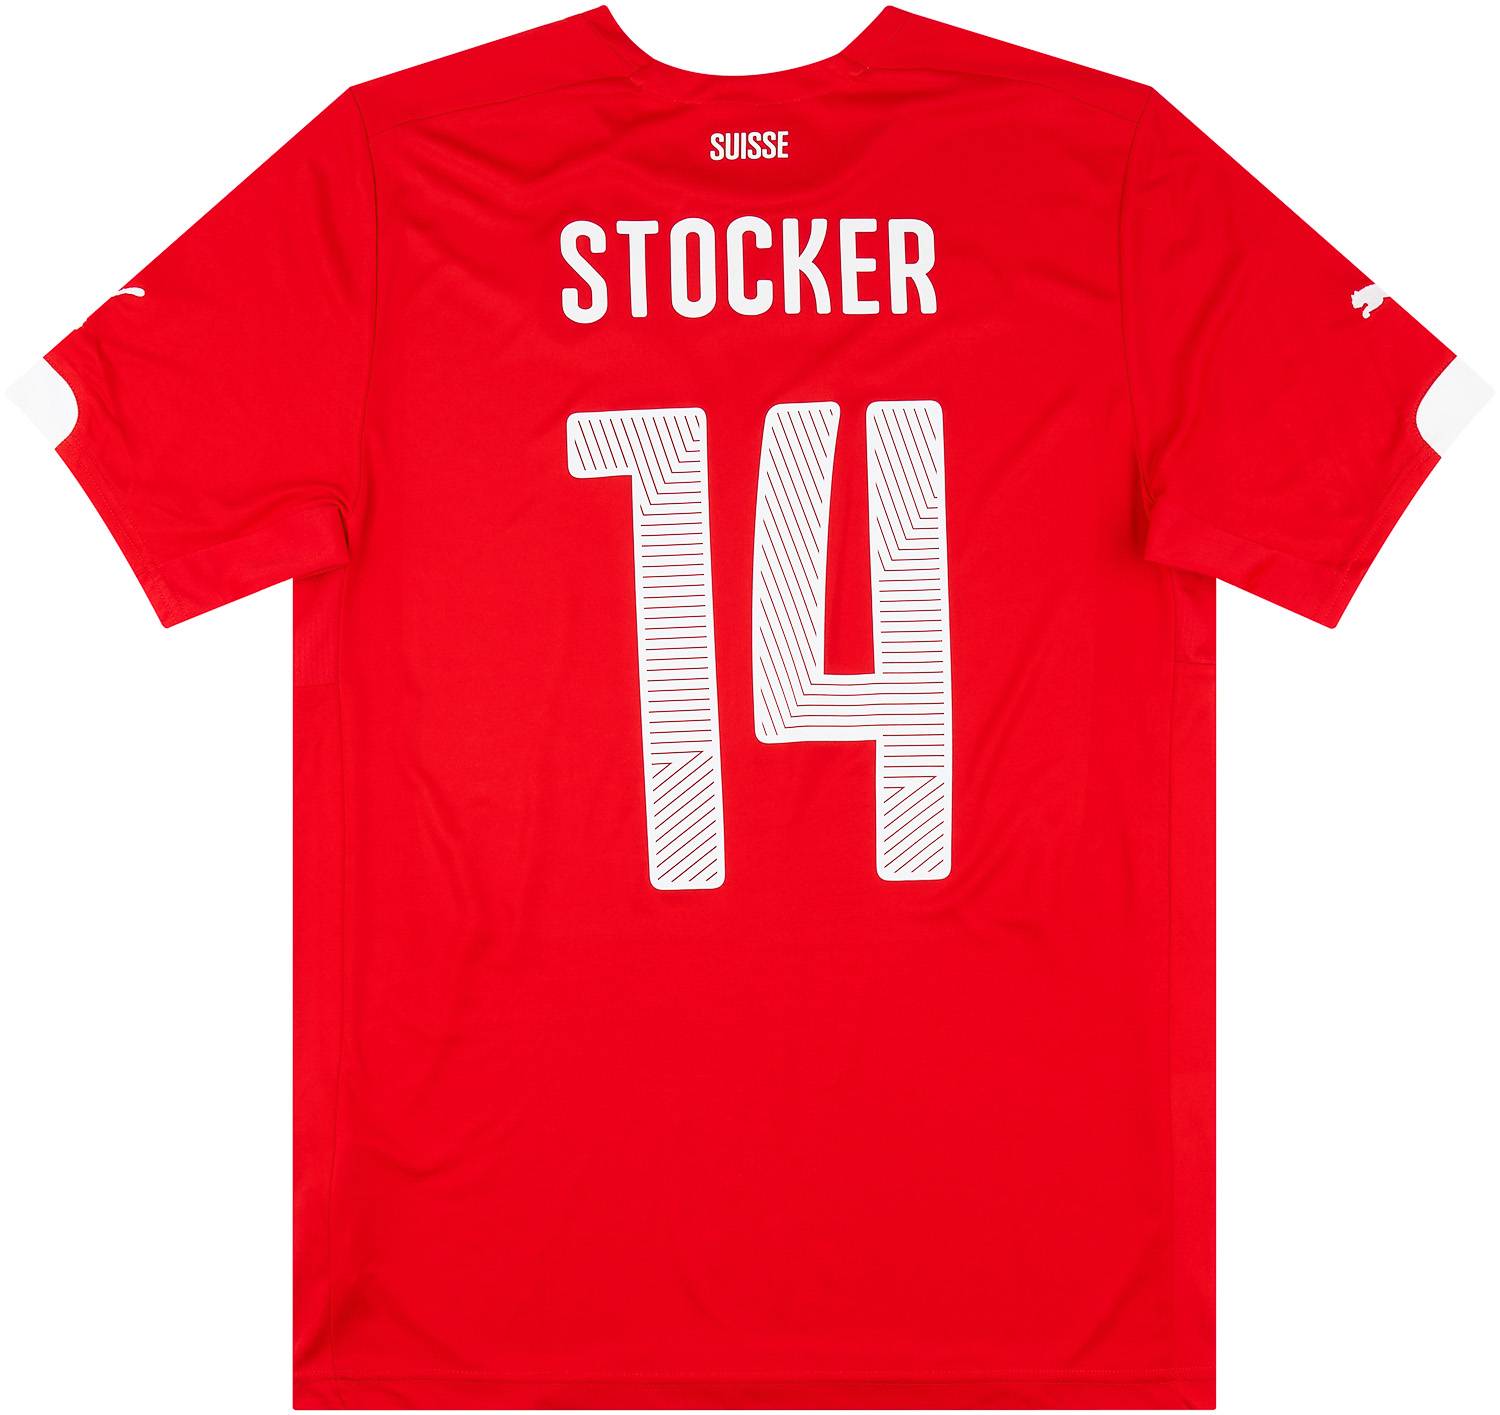 2014-15 Switzerland Player Issue Home Shirt (PRO Fit) Stocker #14- 10/10 - (L)